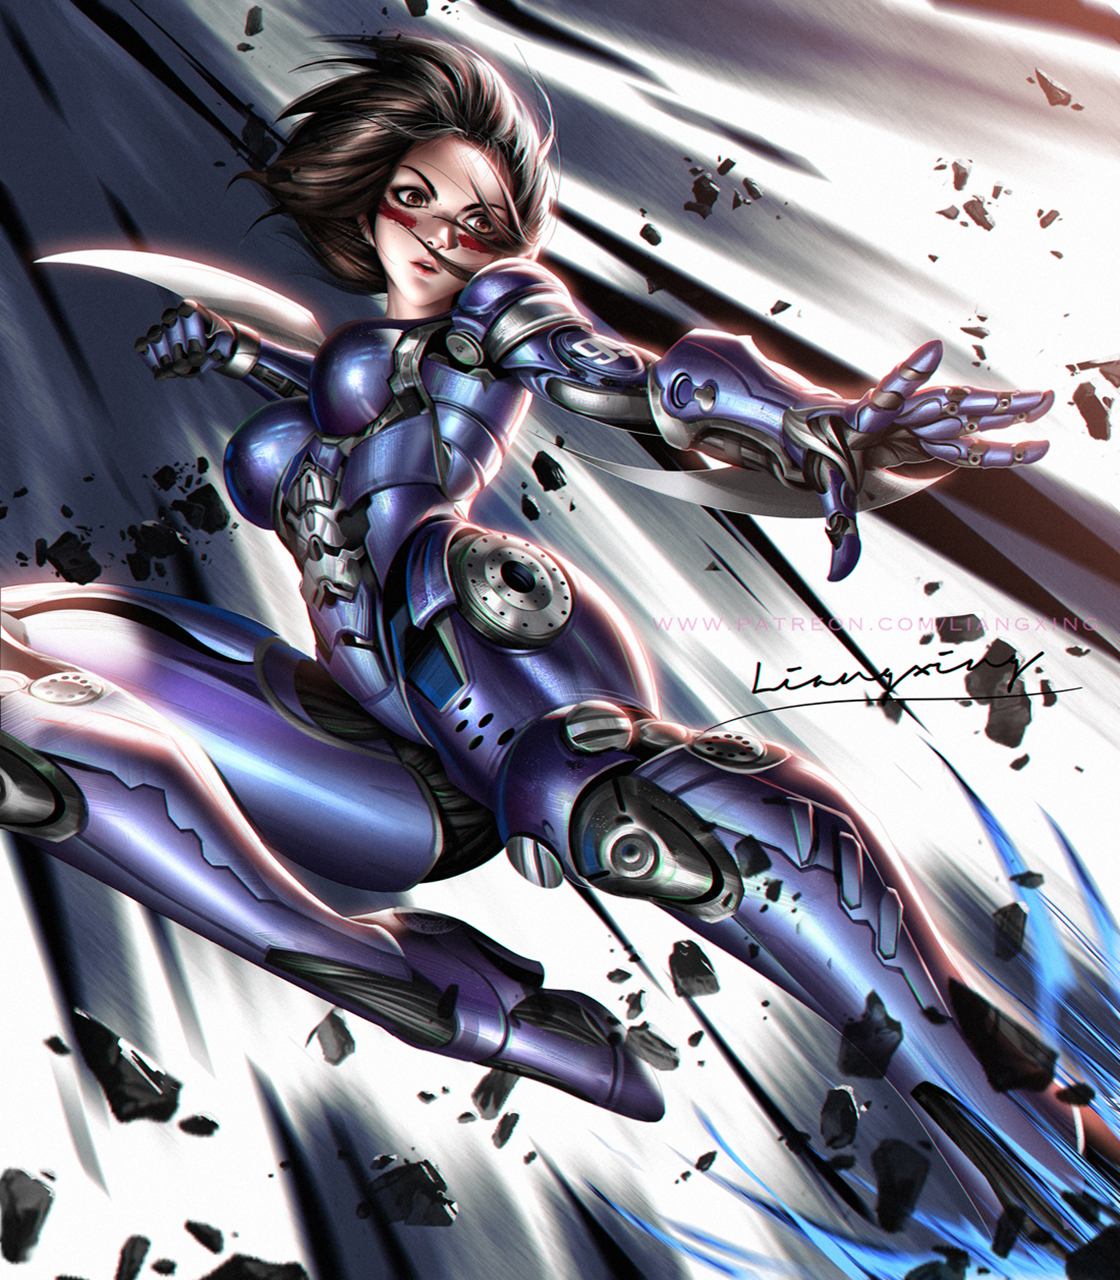 General 1120x1280 Jason Liang drawing Alita androids short hair fighting low-angle weapon blades face paint portrait display digital art signature watermarked women